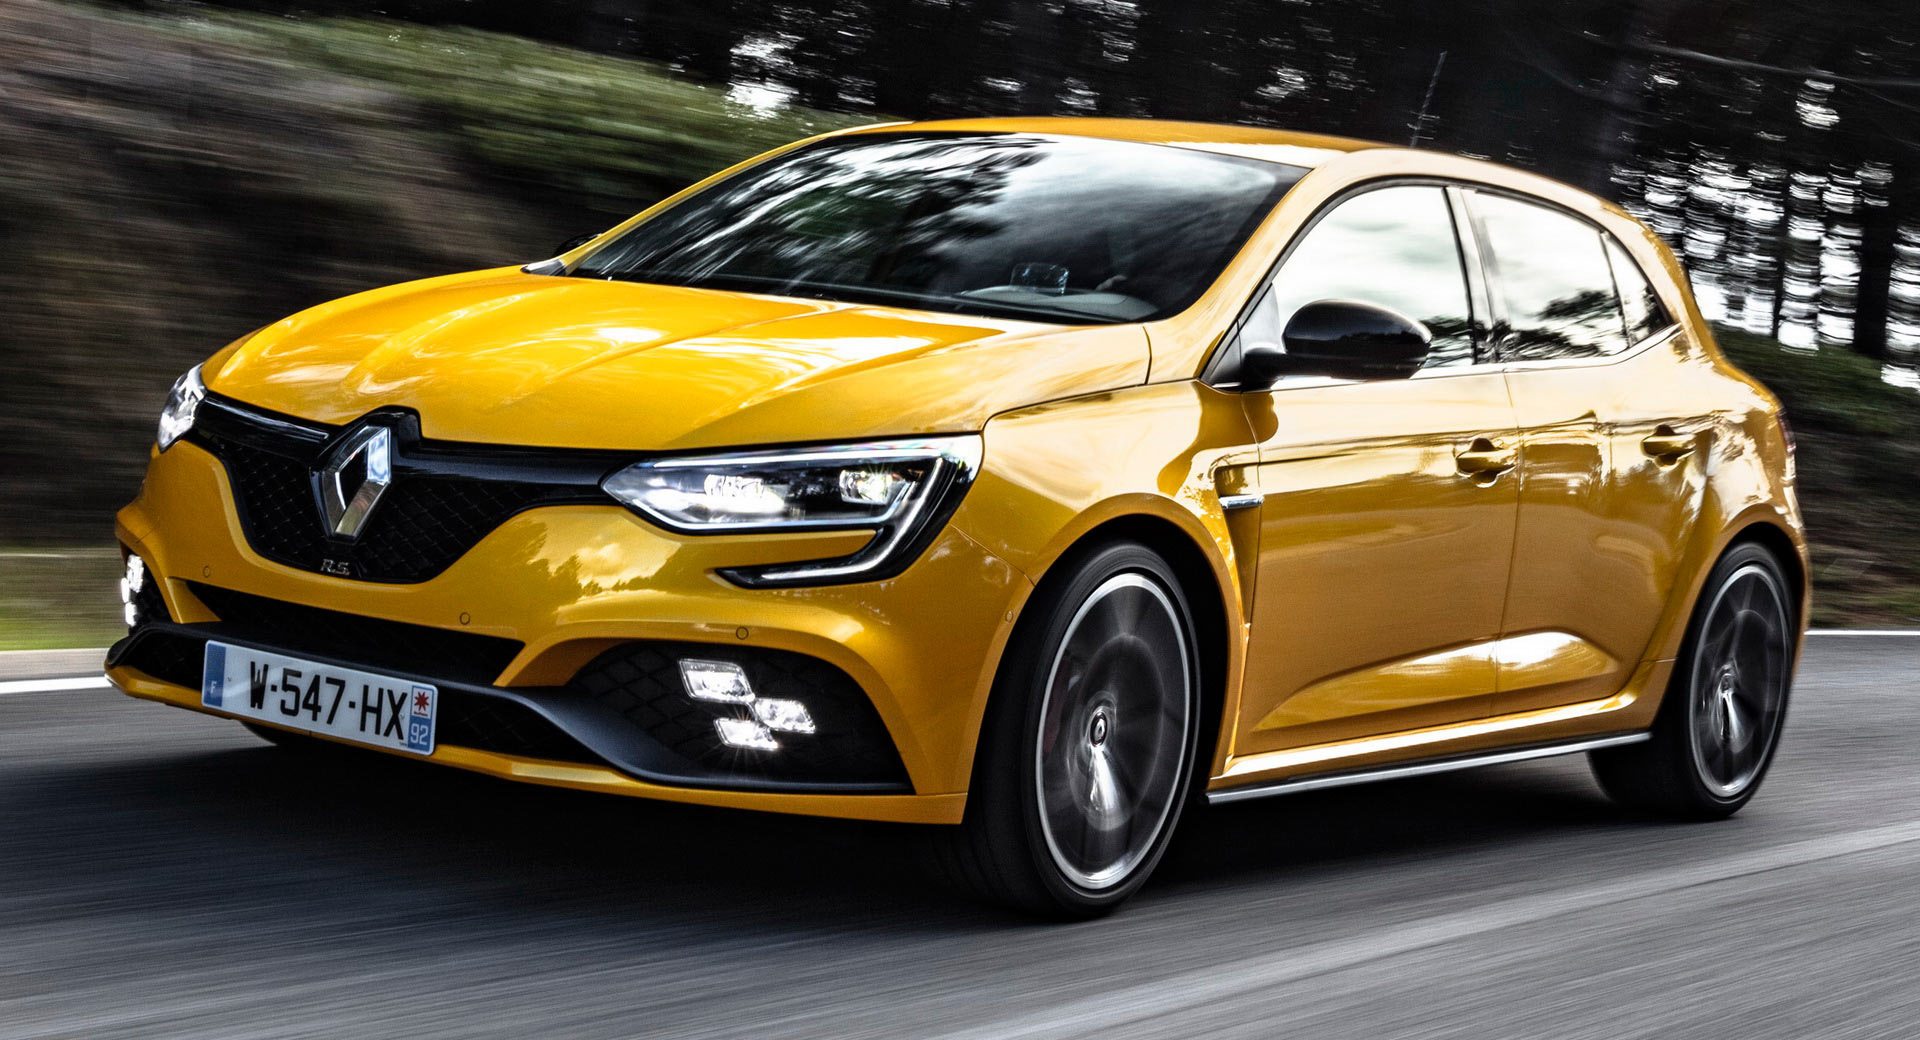 2019 Renault Megane RS Trophy Priced From £31,810 OTR In